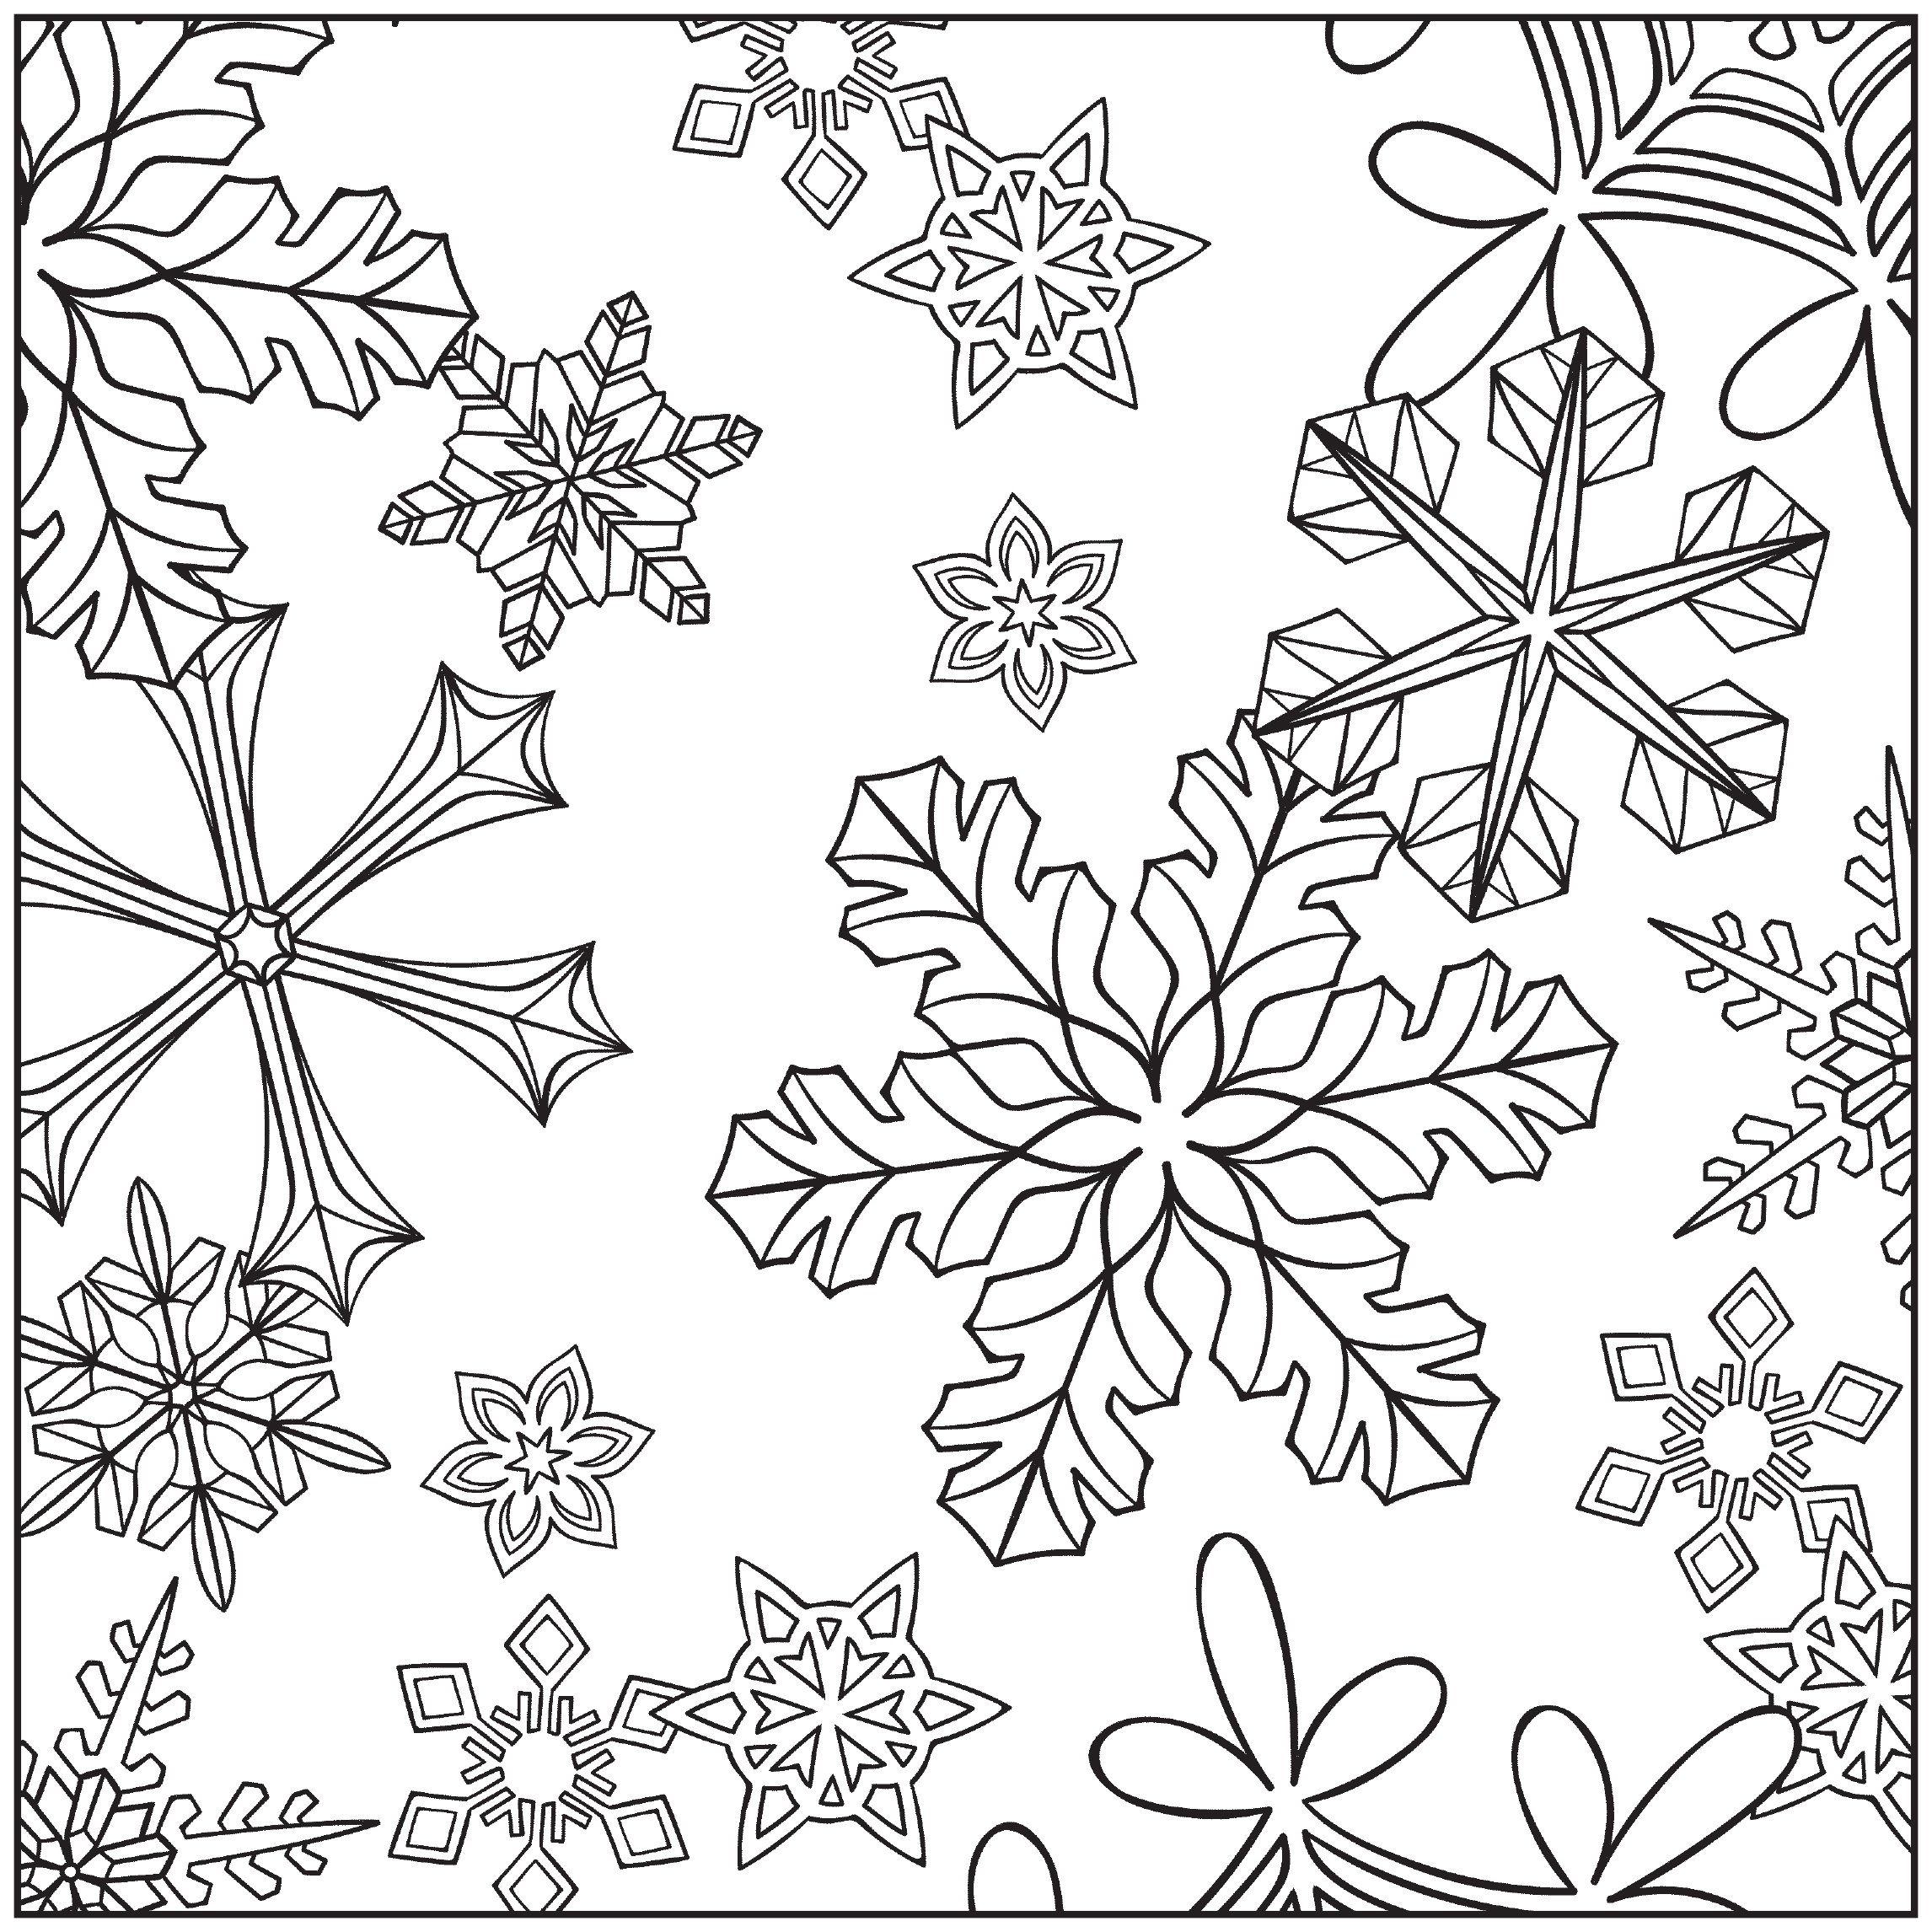 Winter Coloring Pages For Adults Best Coloring Pages For Kids